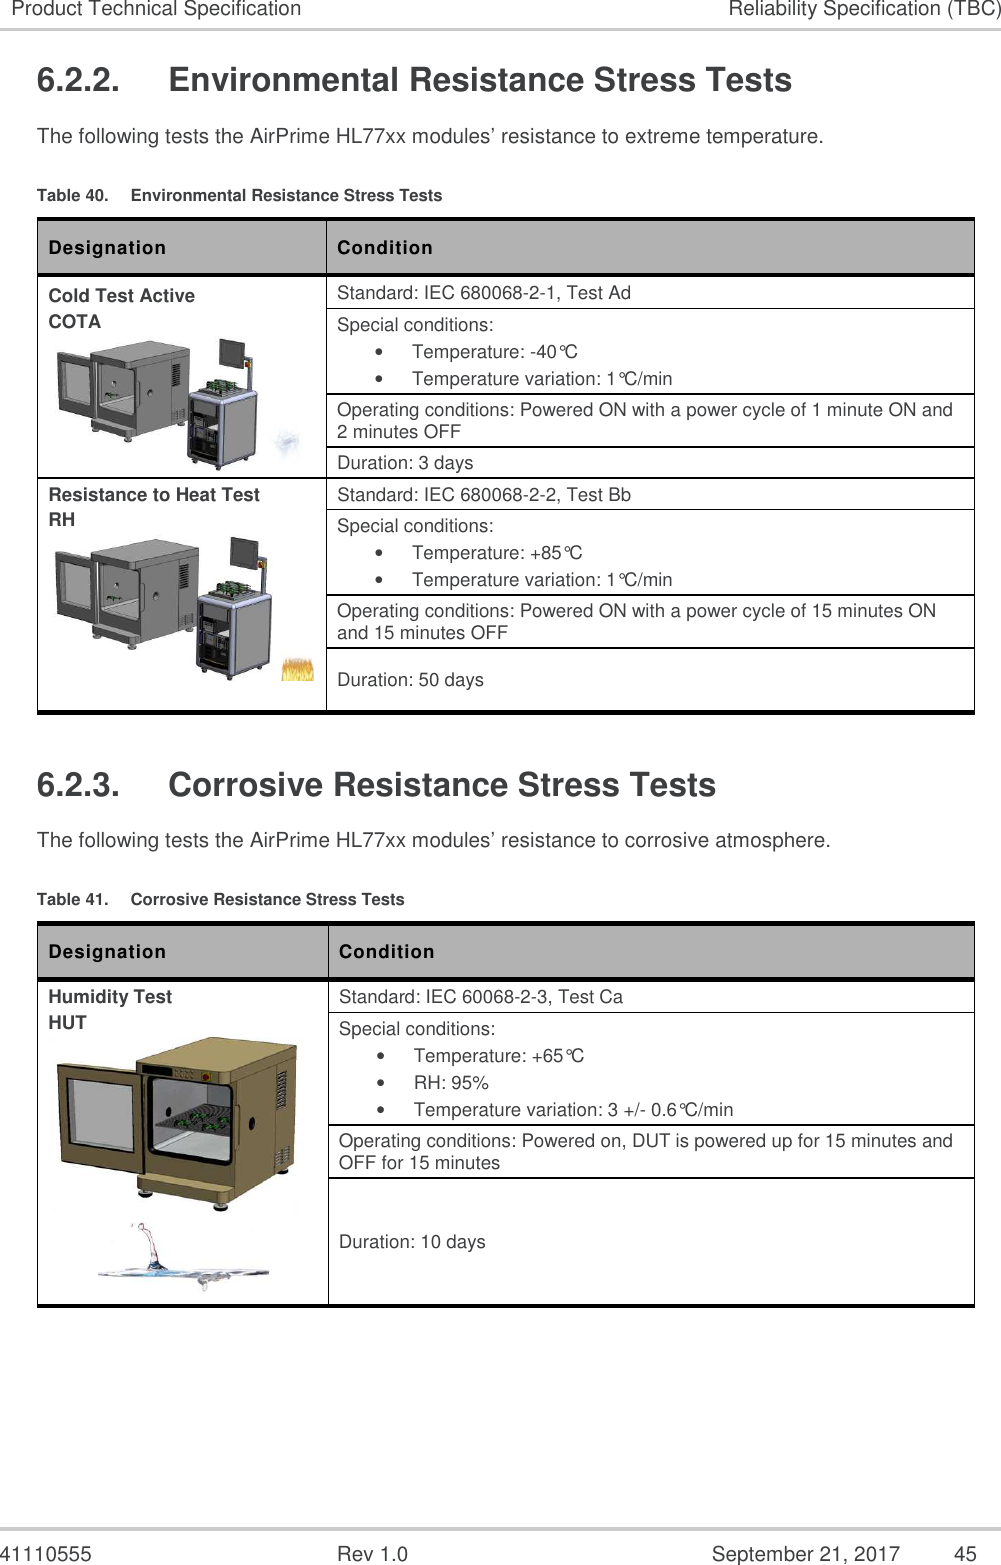   41110555  Rev 1.0  September 21, 2017  45 Product Technical Specification  Reliability Specification (TBC) 6.2.2.  Environmental Resistance Stress Tests The following tests the AirPrime HL77xx modules’ resistance to extreme temperature. Table 40.  Environmental Resistance Stress Tests Designation  Condition Cold Test Active COTA  Standard: IEC 680068-2-1, Test Ad Special conditions: •  Temperature: -40°C •  Temperature variation: 1°C/min Operating conditions: Powered ON with a power cycle of 1 minute ON and 2 minutes OFF Duration: 3 days Resistance to Heat Test RH   Standard: IEC 680068-2-2, Test Bb Special conditions: •  Temperature: +85°C •  Temperature variation: 1°C/min  Operating conditions: Powered ON with a power cycle of 15 minutes ON and 15 minutes OFF Duration: 50 days 6.2.3.  Corrosive Resistance Stress Tests The following tests the AirPrime HL77xx modules’ resistance to corrosive atmosphere. Table 41.  Corrosive Resistance Stress Tests Designation  Condition Humidity Test HUT   Standard: IEC 60068-2-3, Test Ca Special conditions: •  Temperature: +65°C •  RH: 95% •  Temperature variation: 3 +/- 0.6°C/min  Operating conditions: Powered on, DUT is powered up for 15 minutes and OFF for 15 minutes Duration: 10 days 